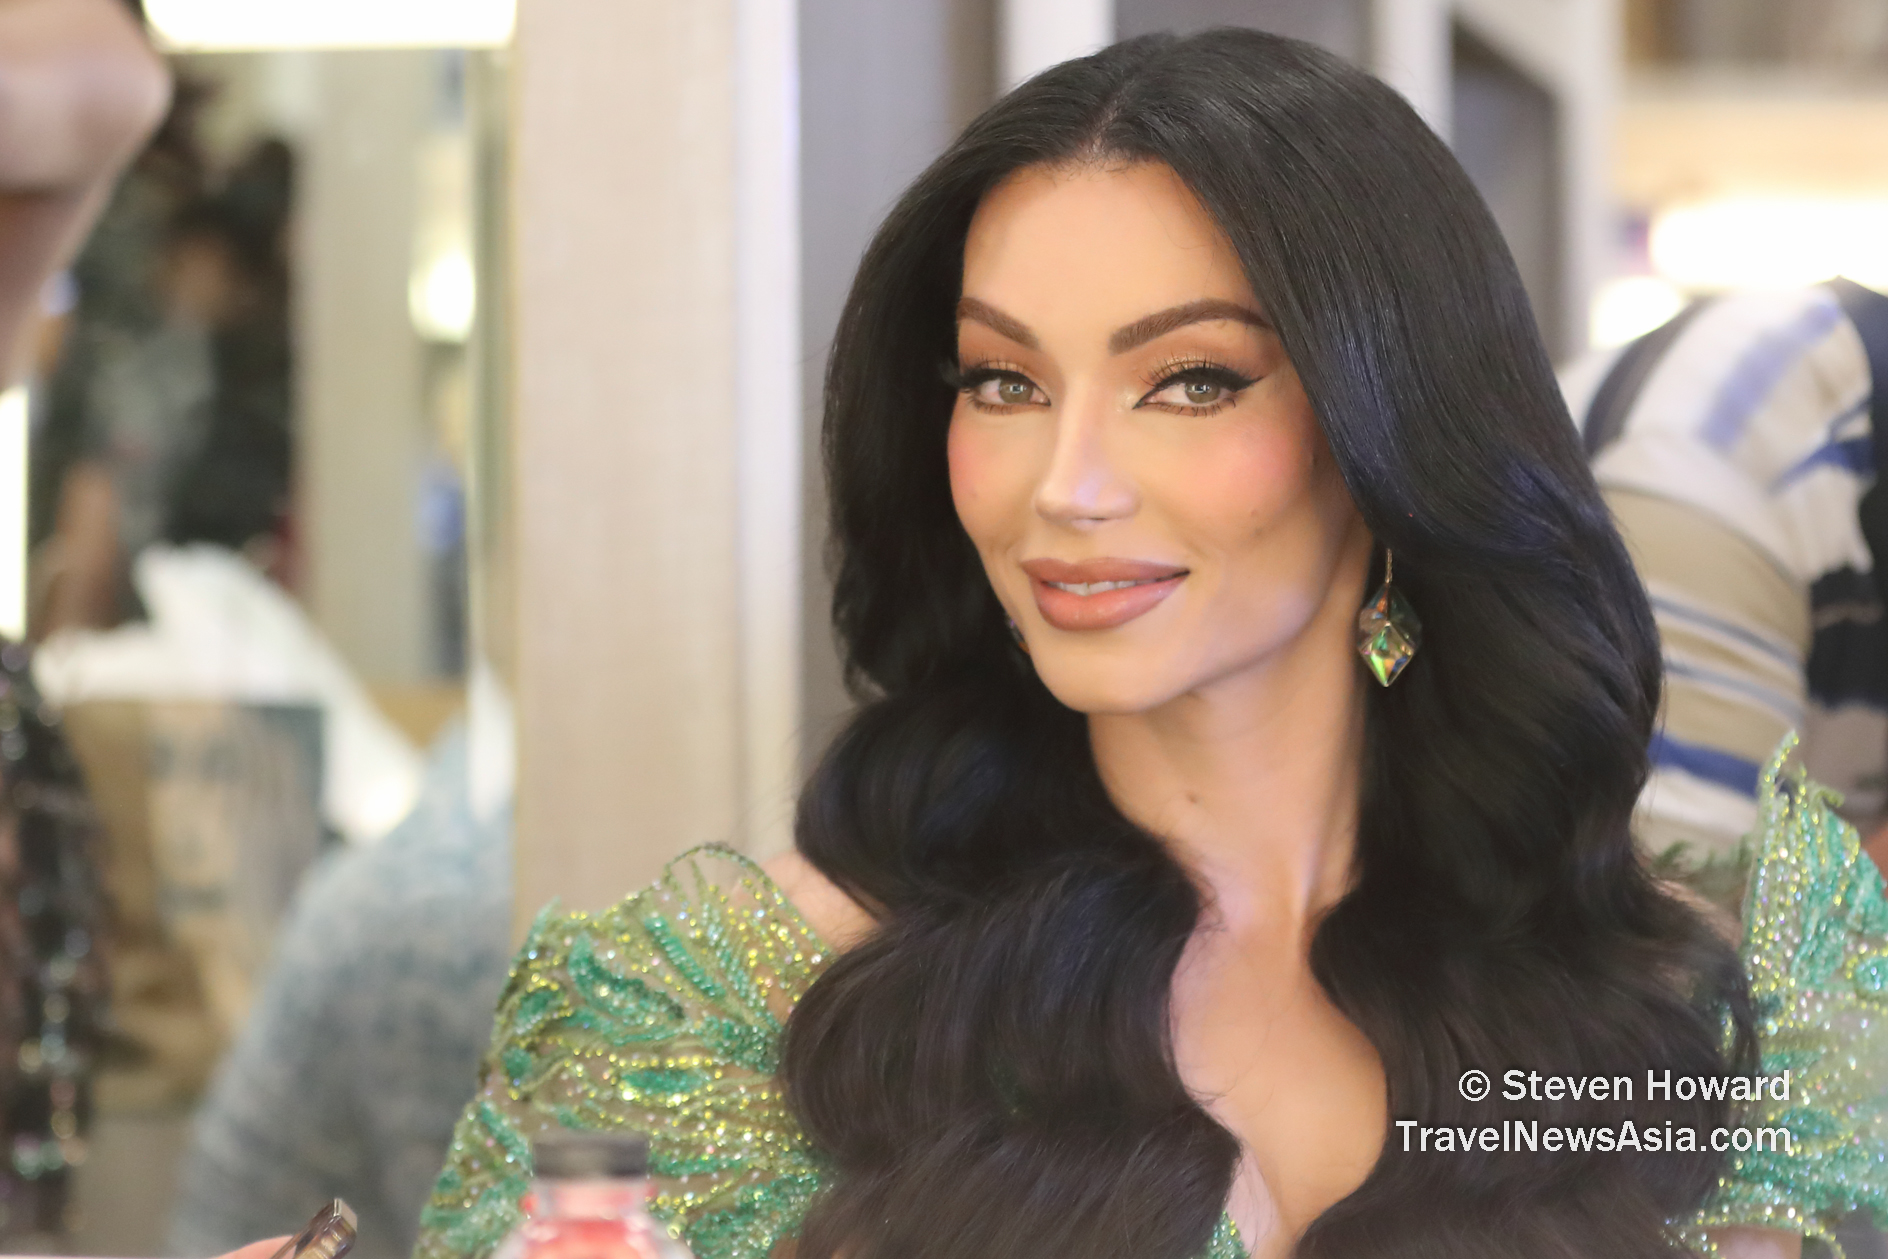 Pictures from Miss International Queen 2023 Transgender Beauty Pageant in Pattaya, Thailand. Pictures by Steven Howard of TravelNewsAsia.com